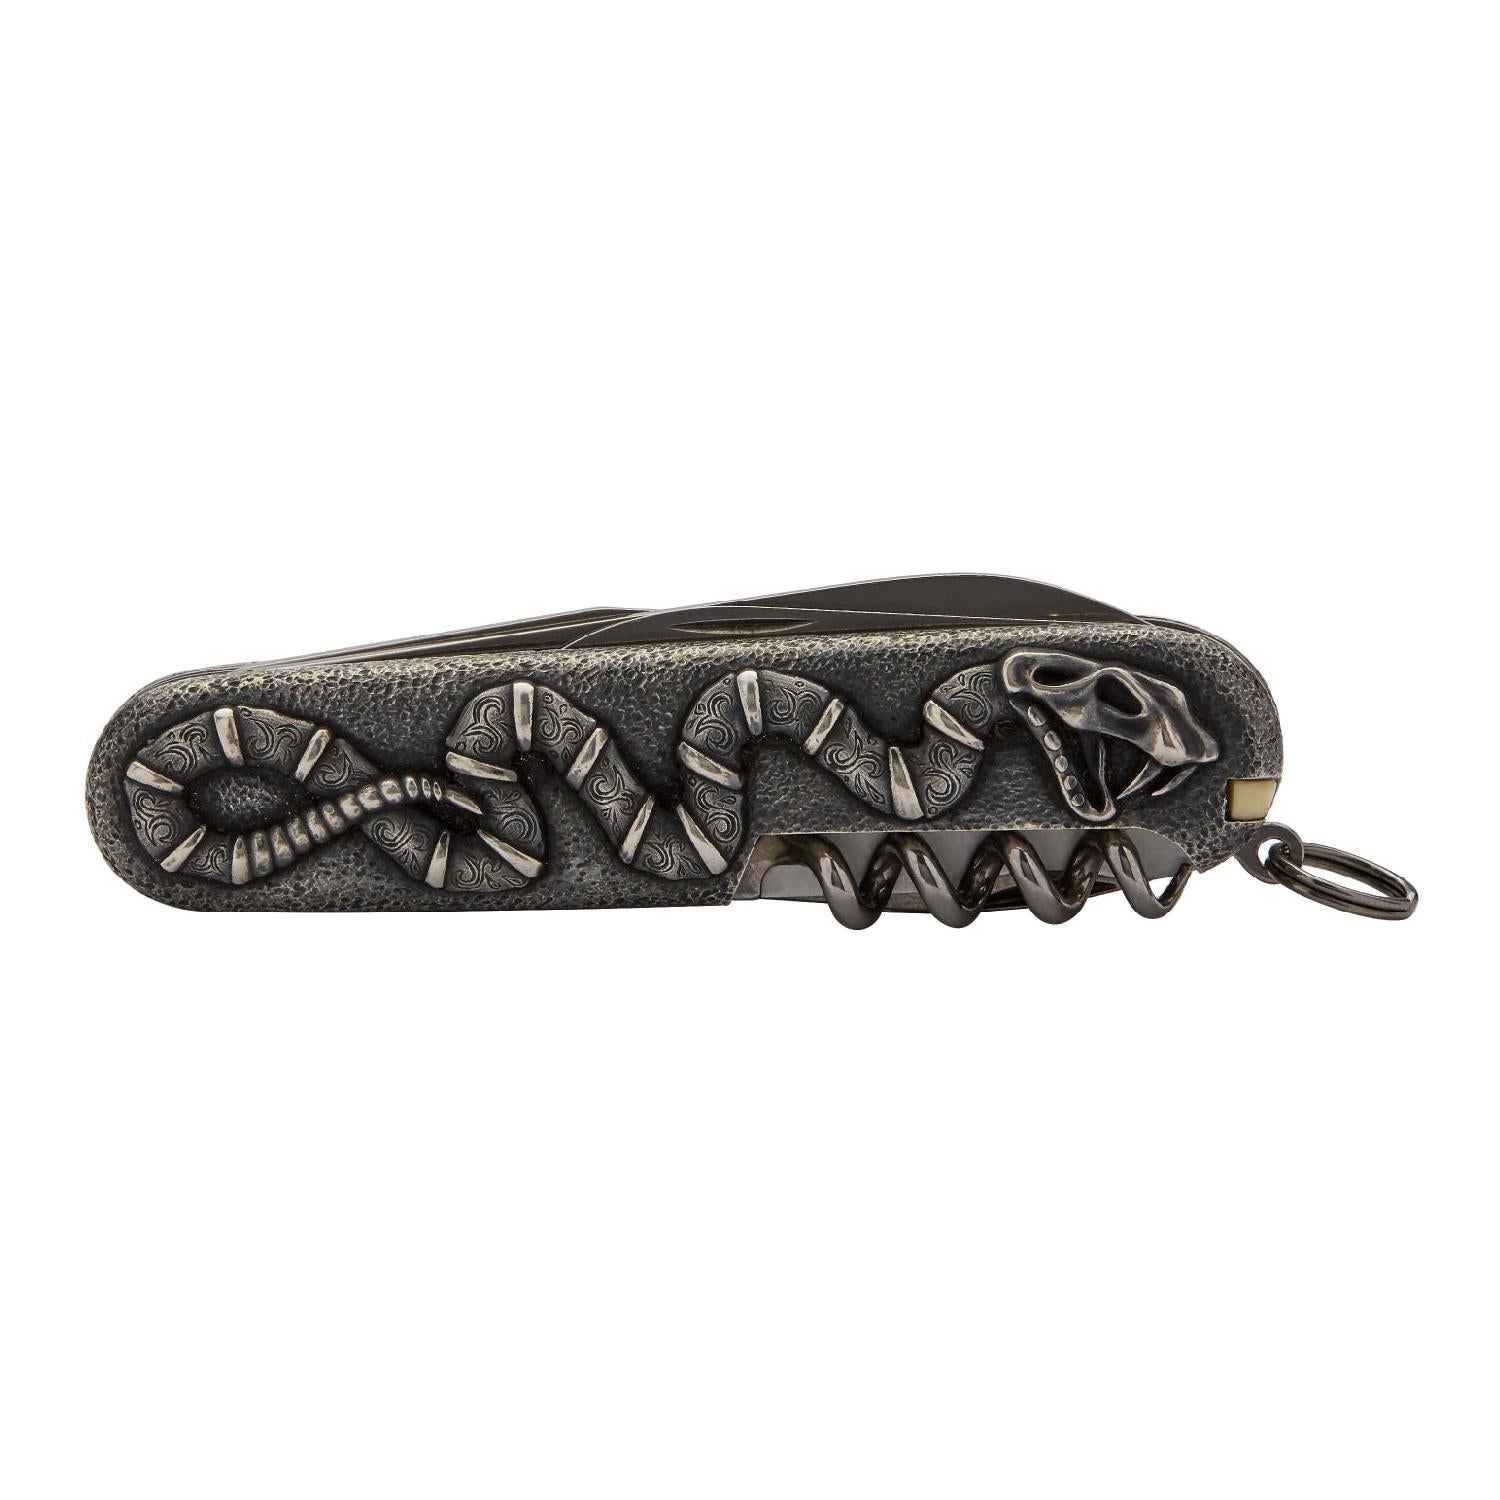 Stephen Webster Tequila Lore Snake Swiss Army Couteau en argent sterling